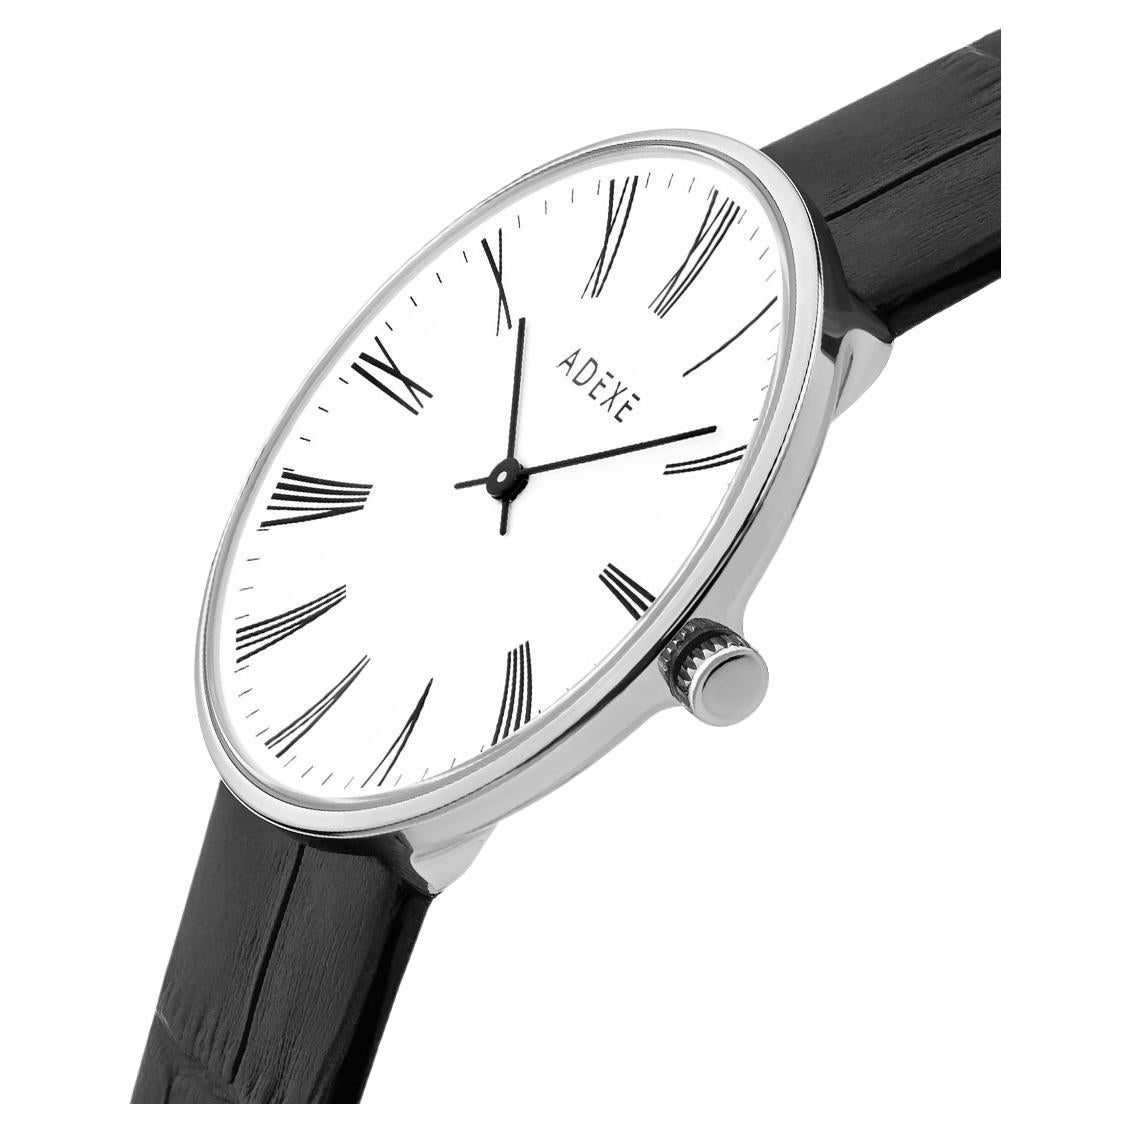 Sistine Black & white42mm Leather Band Quartz Watch (Complimentary extra straps) For Sale